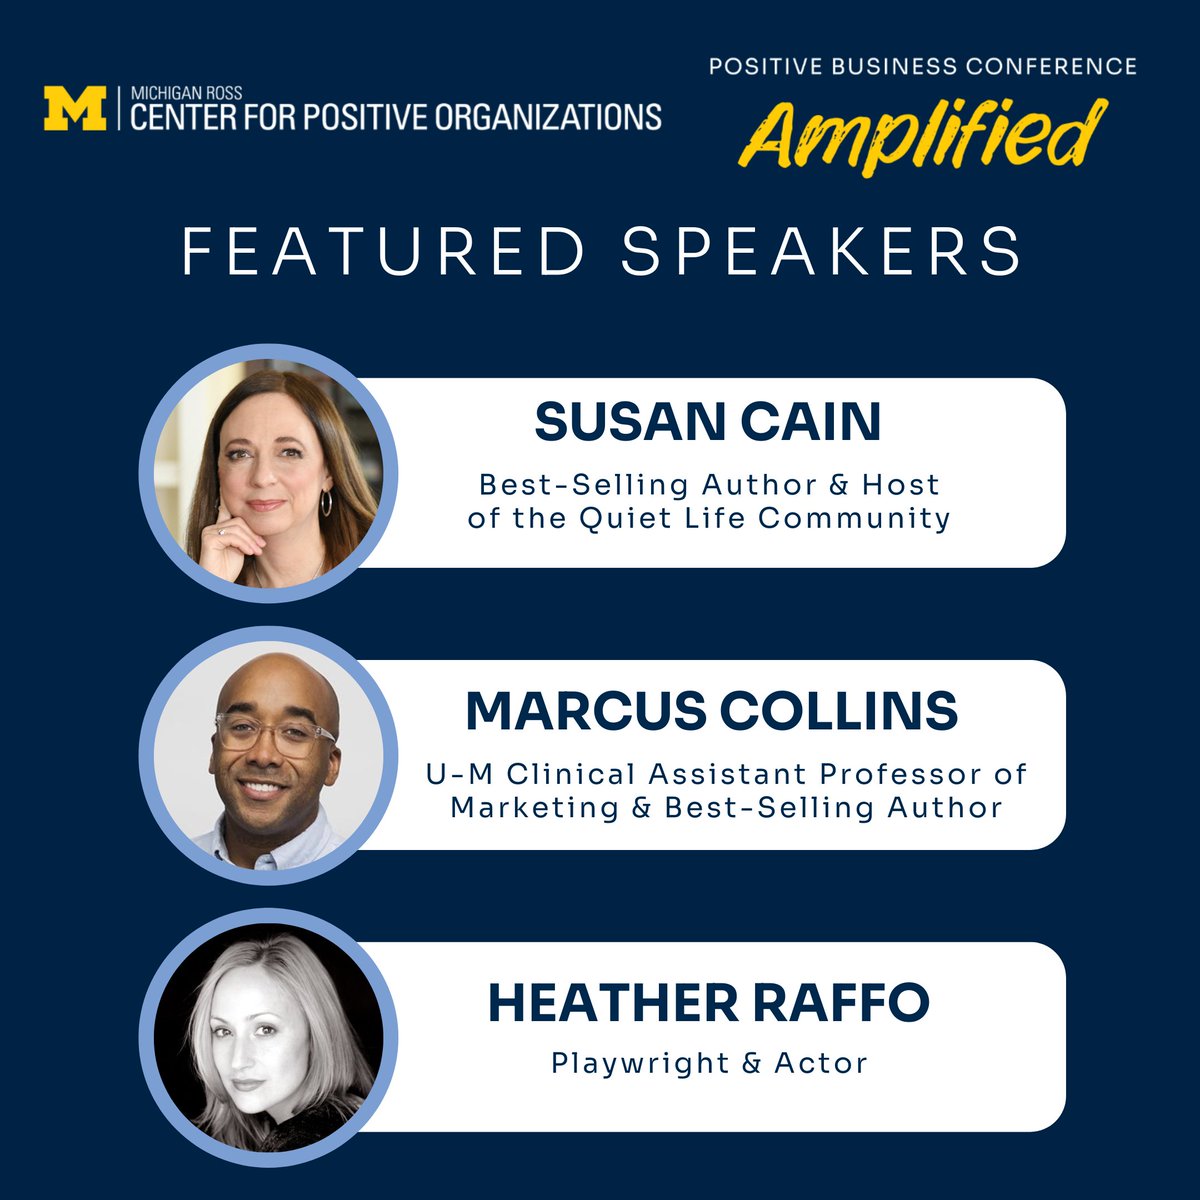 Our speaker roster includes business leaders, luminaries, and @UMich faculty, who are widely recognized as impactful researchers, innovative thinkers, leading practitioners, and life-changing educators. Register today: positivebusinessconference.com